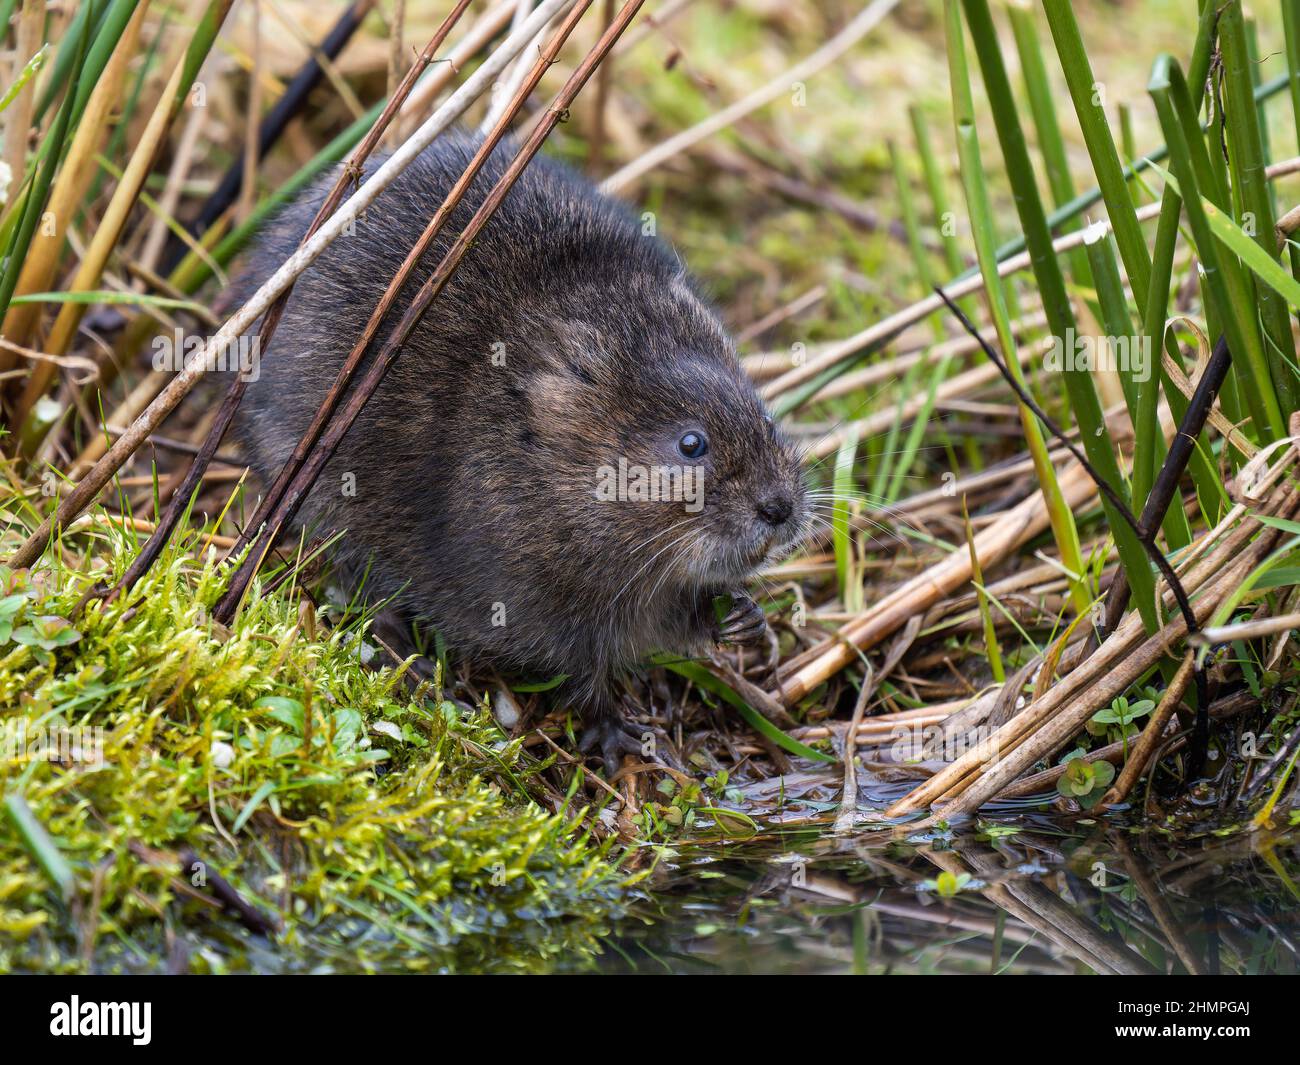 Water Vole Eating a Reed on a Bank Stock Photo